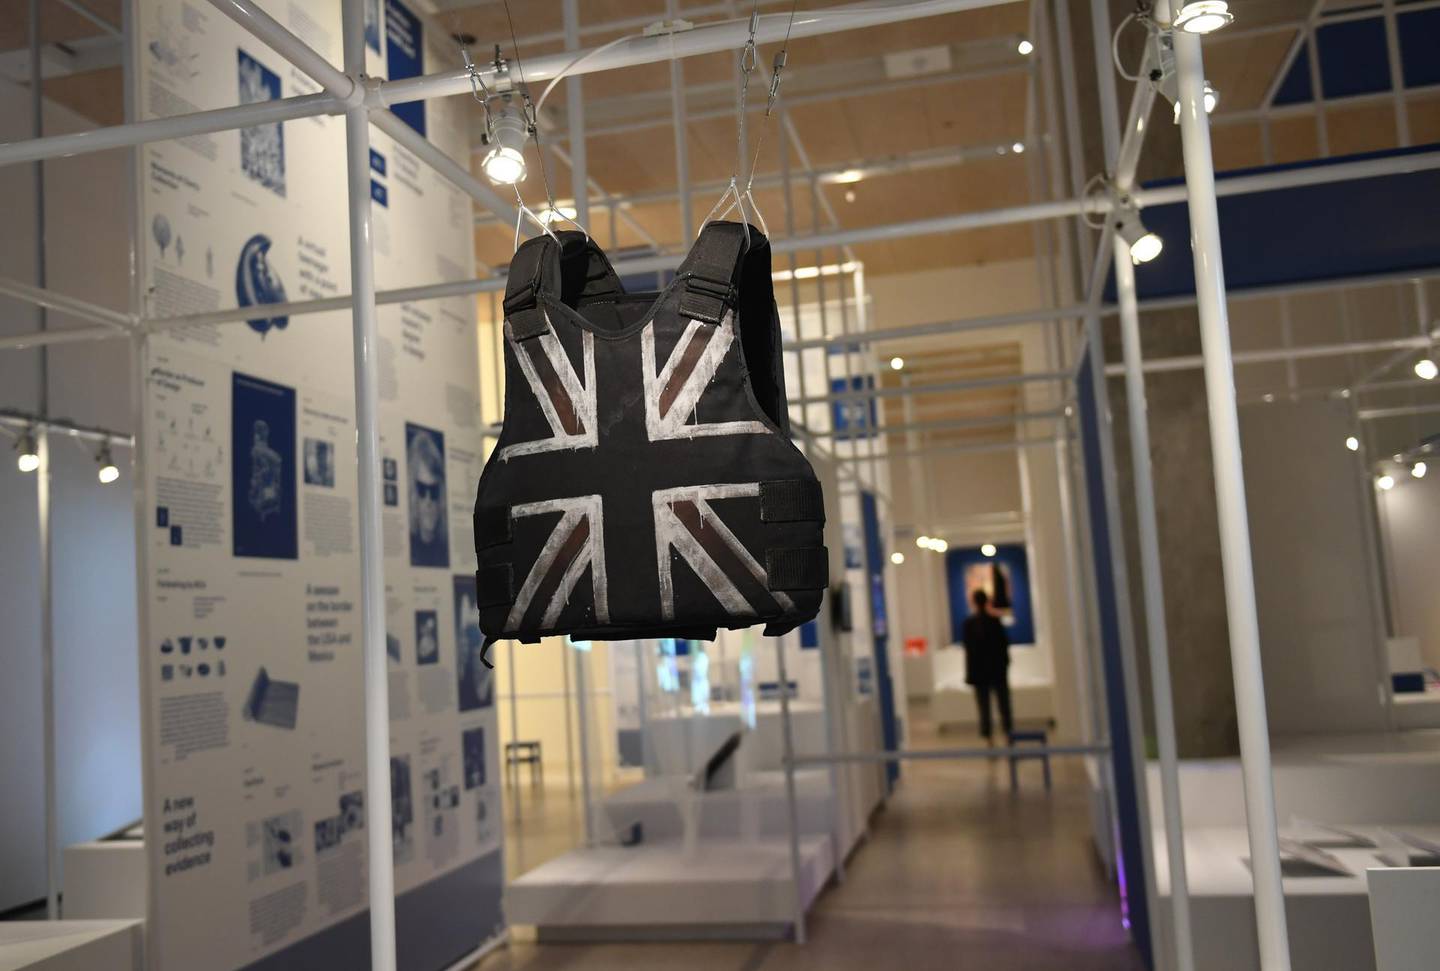 LONDON, ENGLAND - OCTOBER 20: Stormzy's Stab Proof Vest, by Banksy, on display during the "Beazley Designs Of The Year 2020" photocall at Design Museum on October 20, 2020 in London, England. (Photo by Stuart C. Wilson/Getty Images)